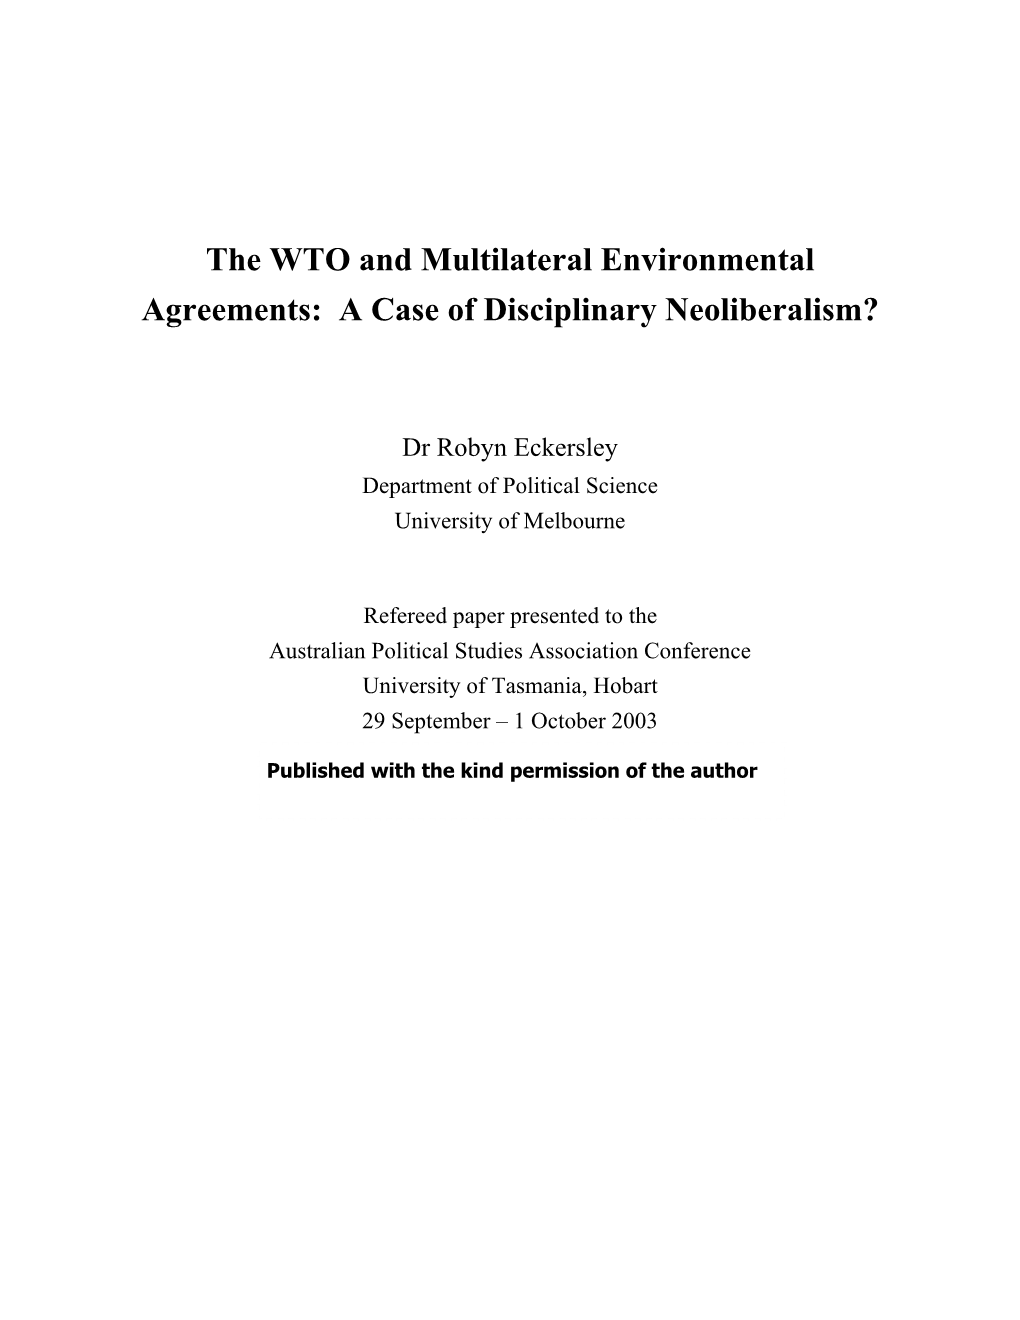 The WTO and Multilateral Environmental Agreements: a Case of Disciplinary Neoliberalism?